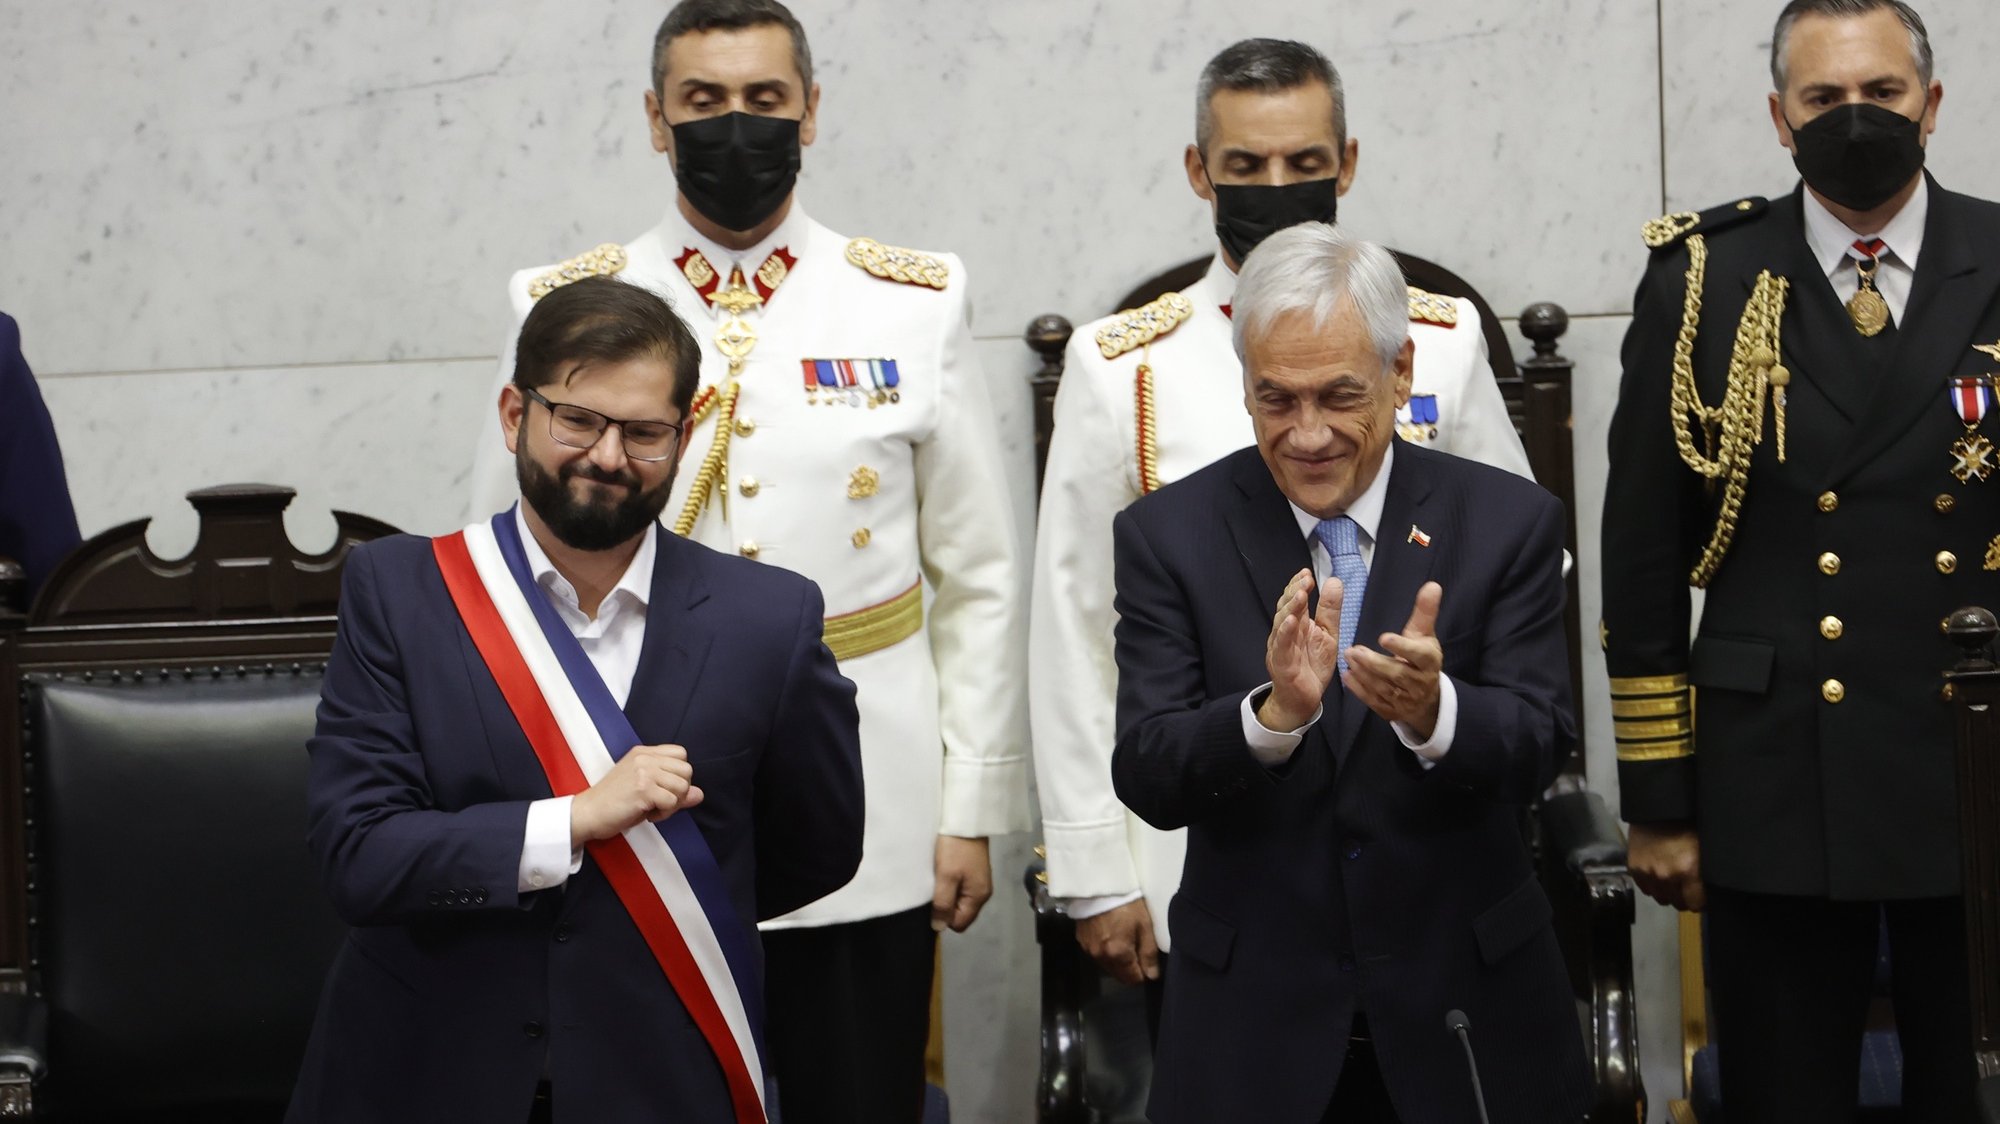 epa09817630 New Chilean President Gabriel Boric greets those attending the National Congress after receiving the presidential sash, while now former President Sebastian Pinera (R) applauds, during a investiture ceremony in Valparaiso, Chile, 11 March 2022. Boric, who assumes as the youngest president in the history of Chile, is sworn in on 11 March in the midst of the social challenges left by the social outbreak in the country, with a cabinet that for the first time will be majority women and before the hope and uncertainty involved in drafting a new constitution.  EPA/Alberto Valdes